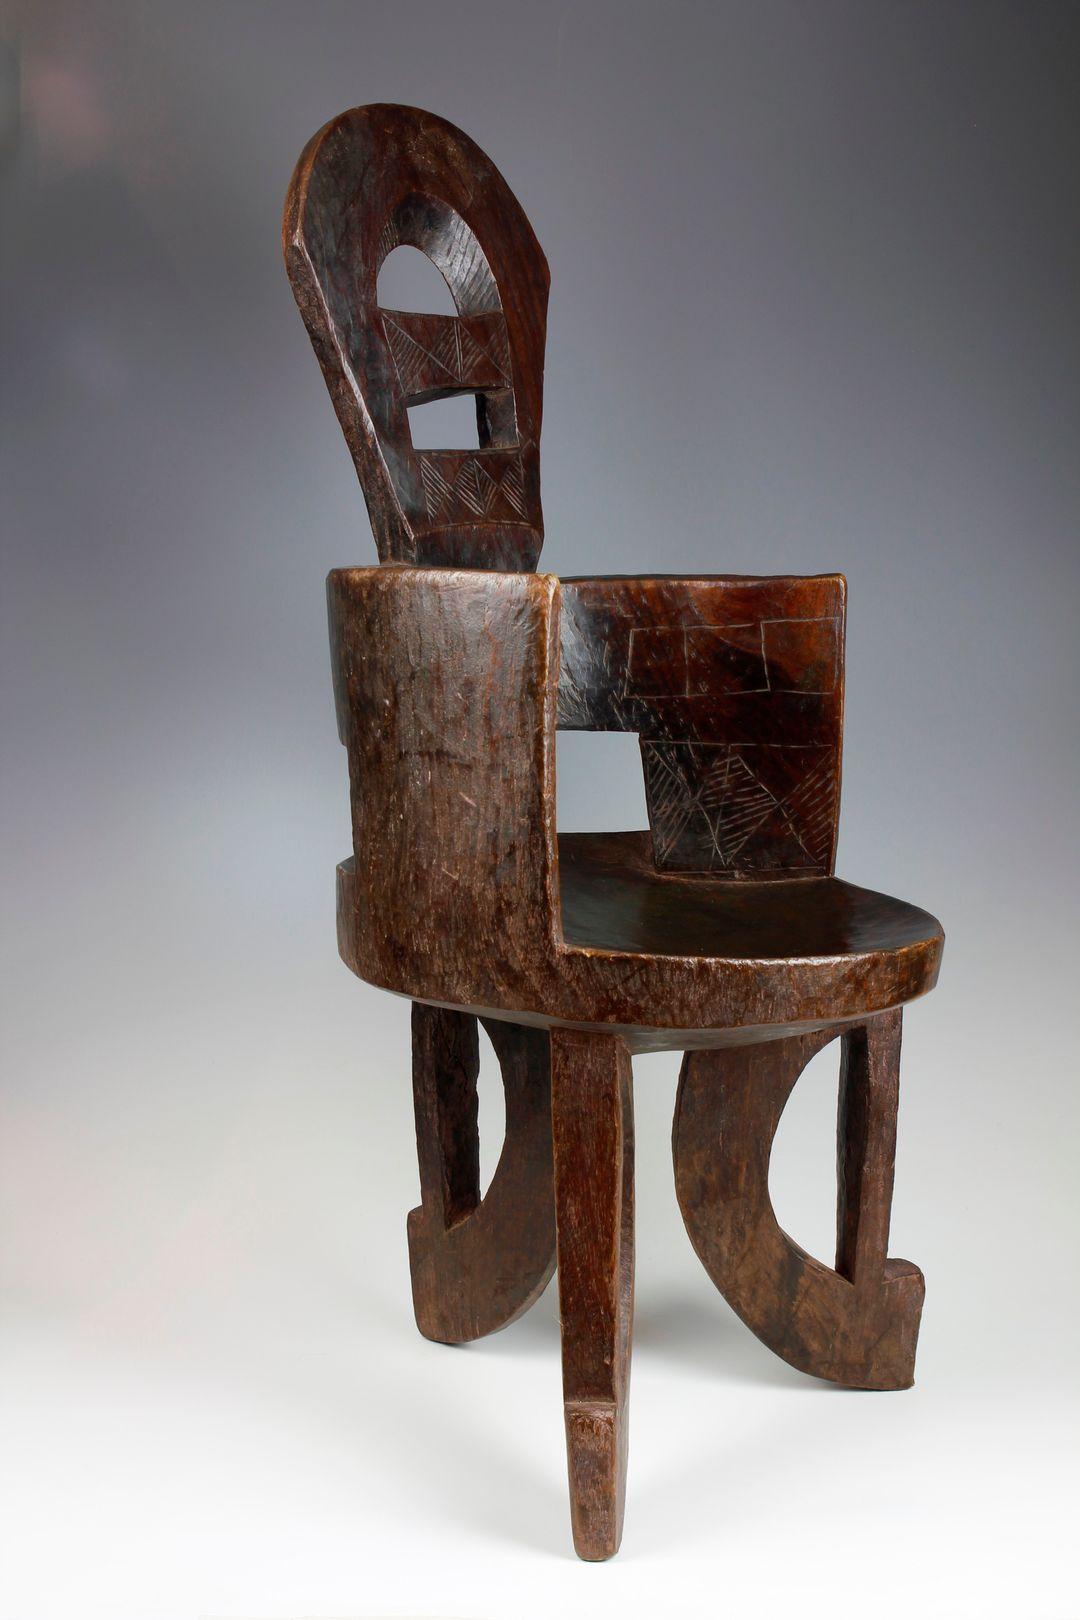 Tribal Slender 19th Century High-Backed Ethiopian Chair For Sale